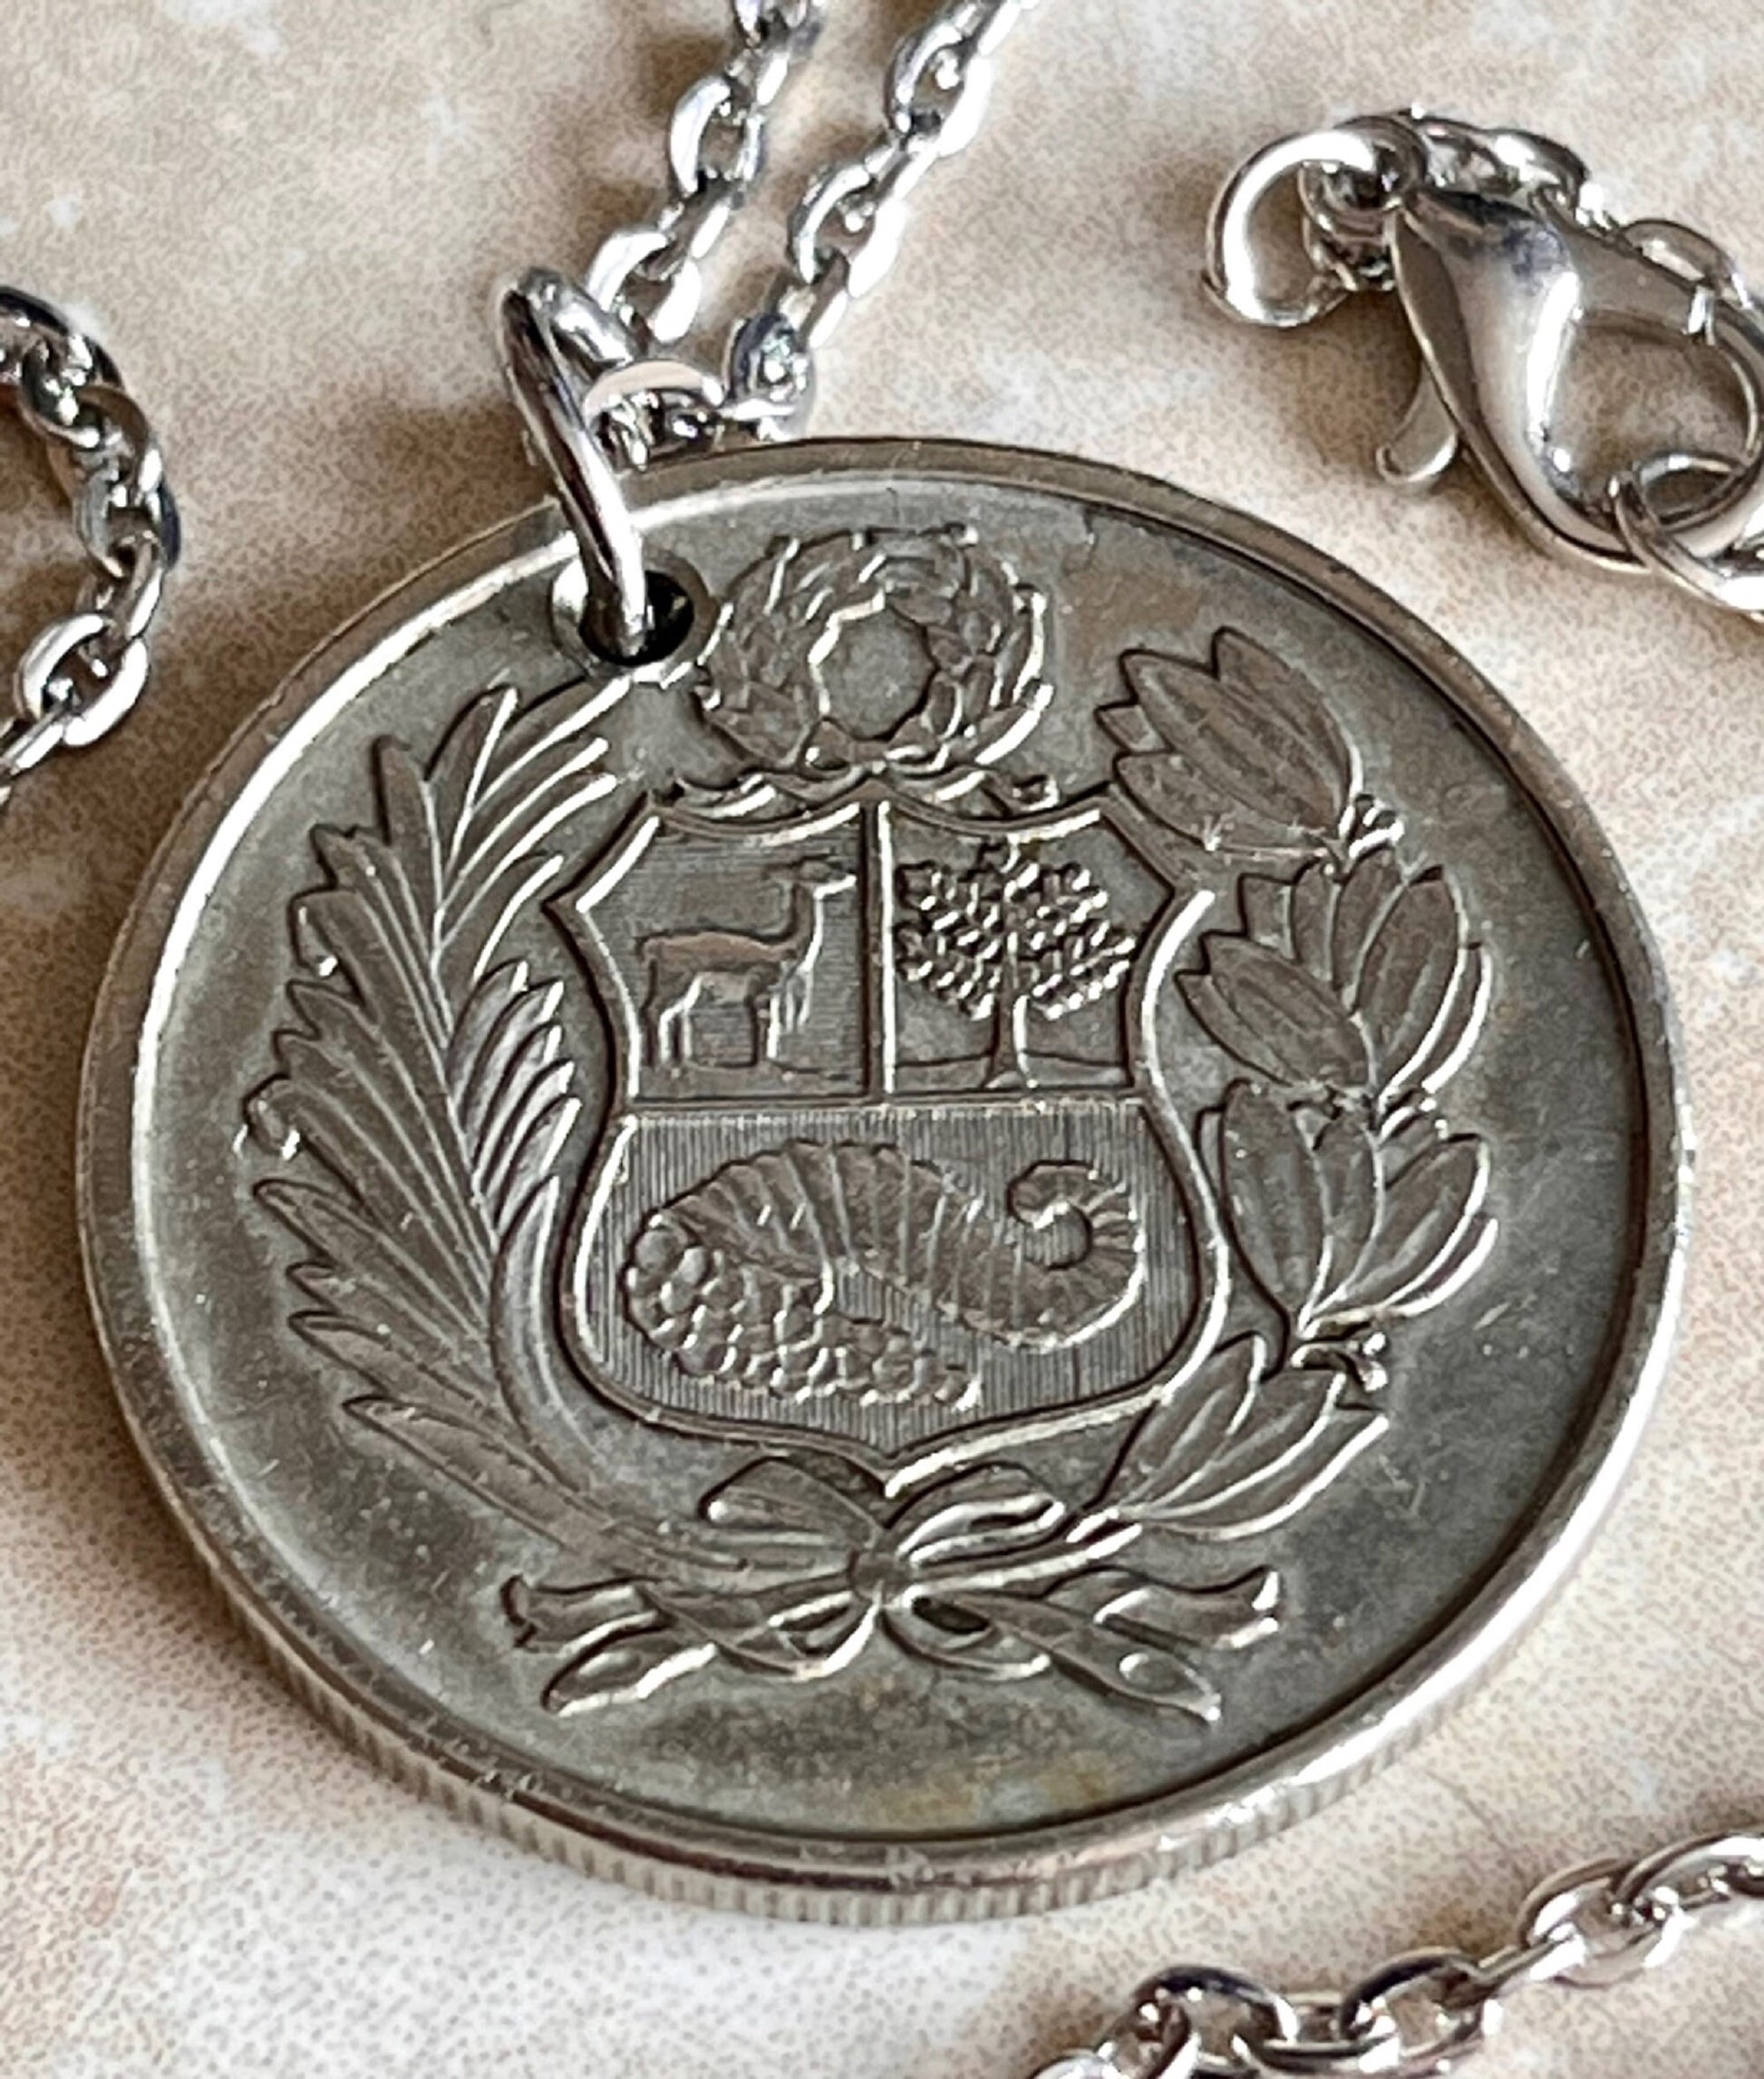 Peru Coin Pendant Peruvian 100 Sols De Oro Personal Necklace Old Vintage Handmade Jewelry Gift Friend Charm For Him Her World Coin Collector